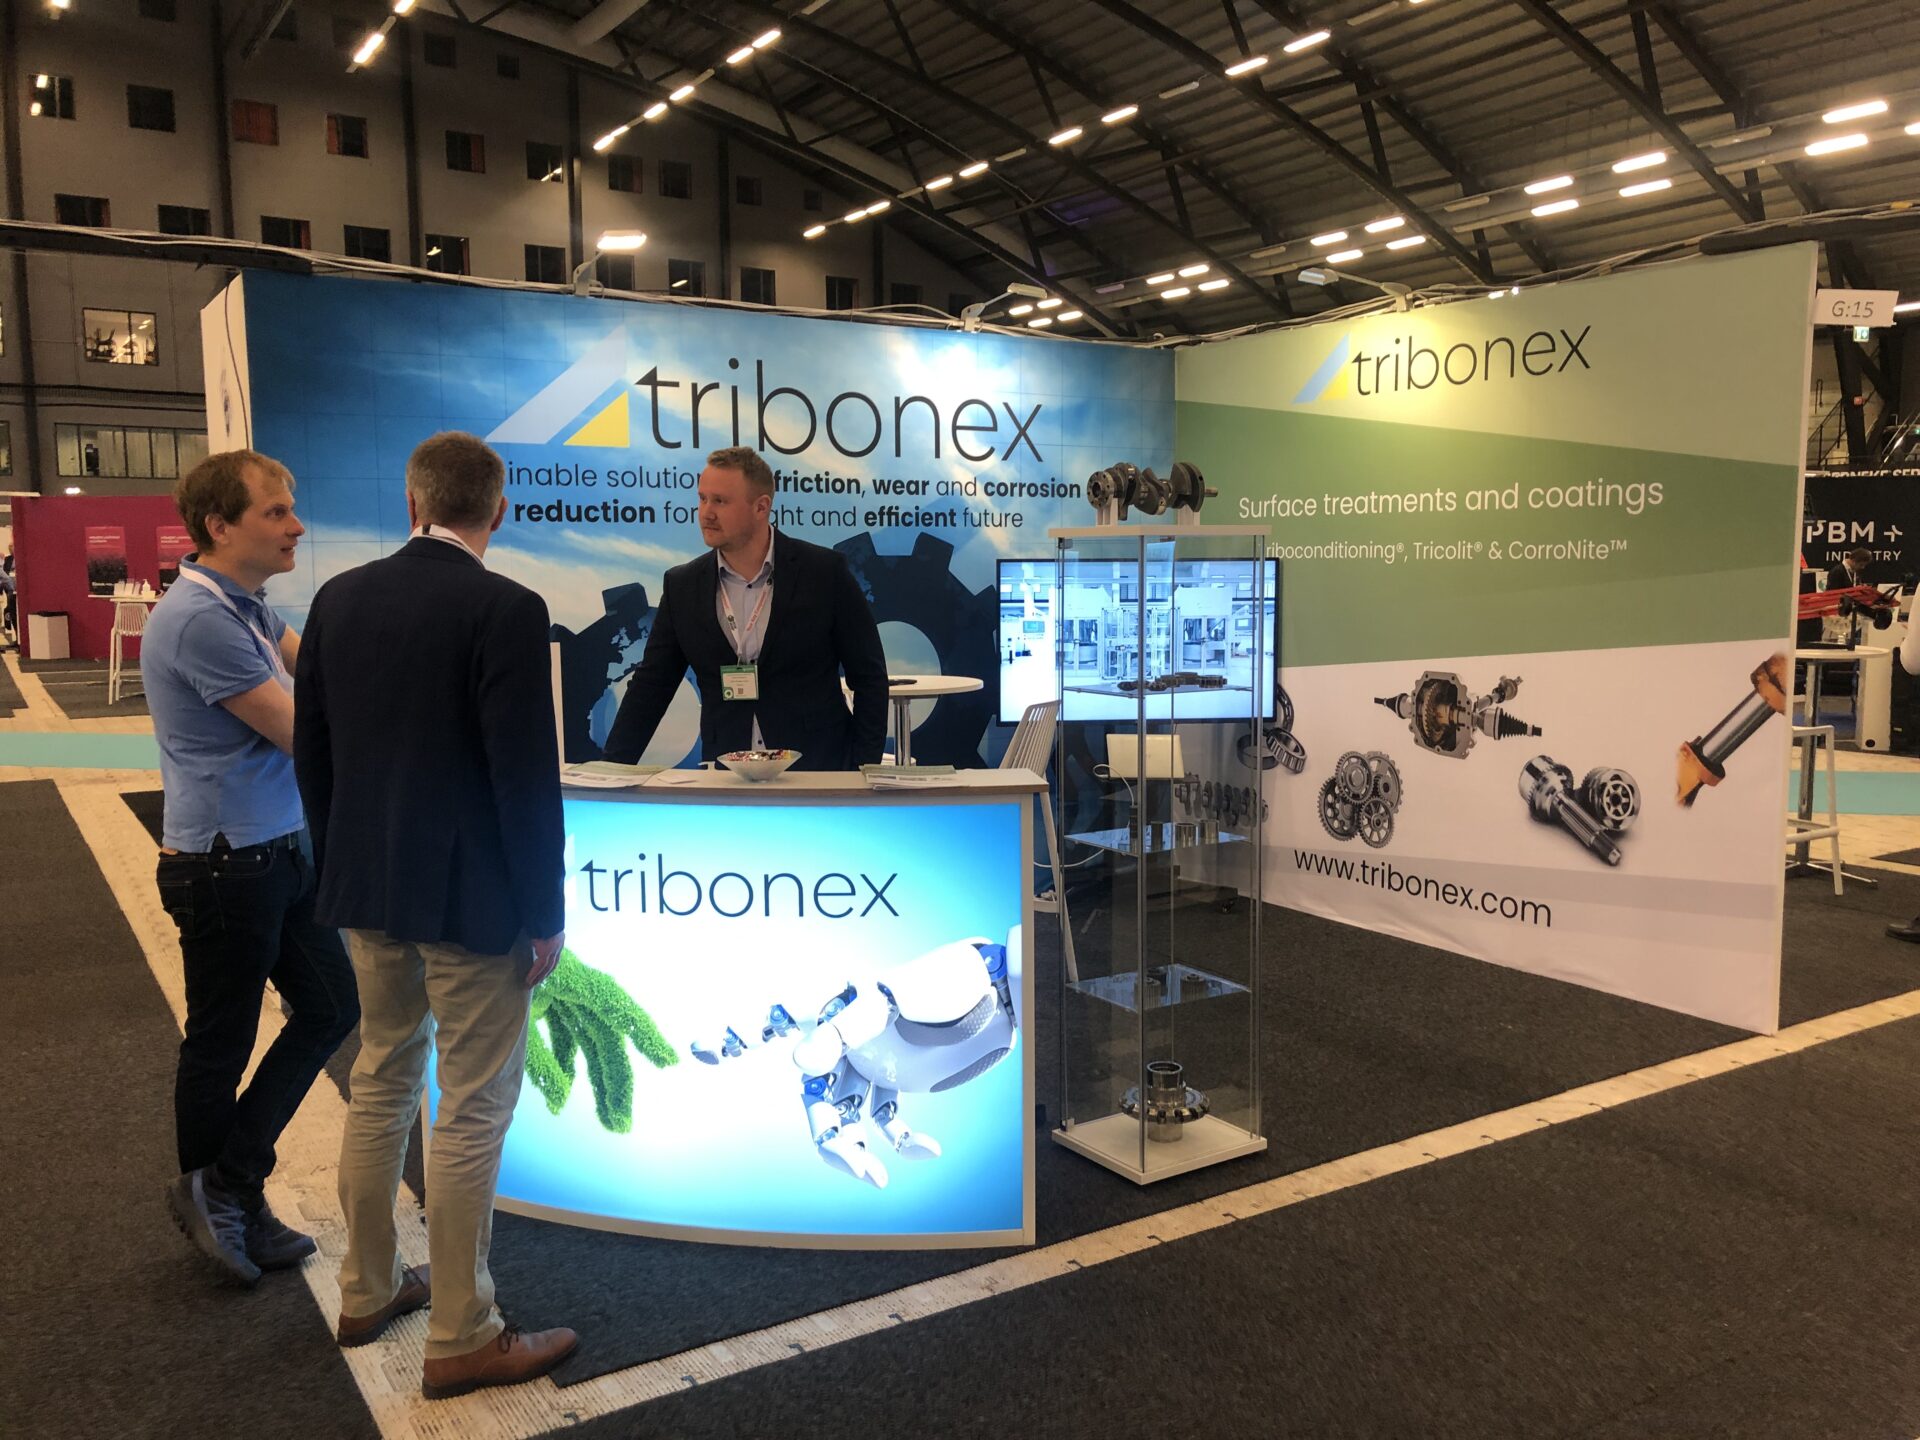 Tribonex Showcases Friction and Wear Reducing Technologies at Advanced Engineering Fair in Gothenburg